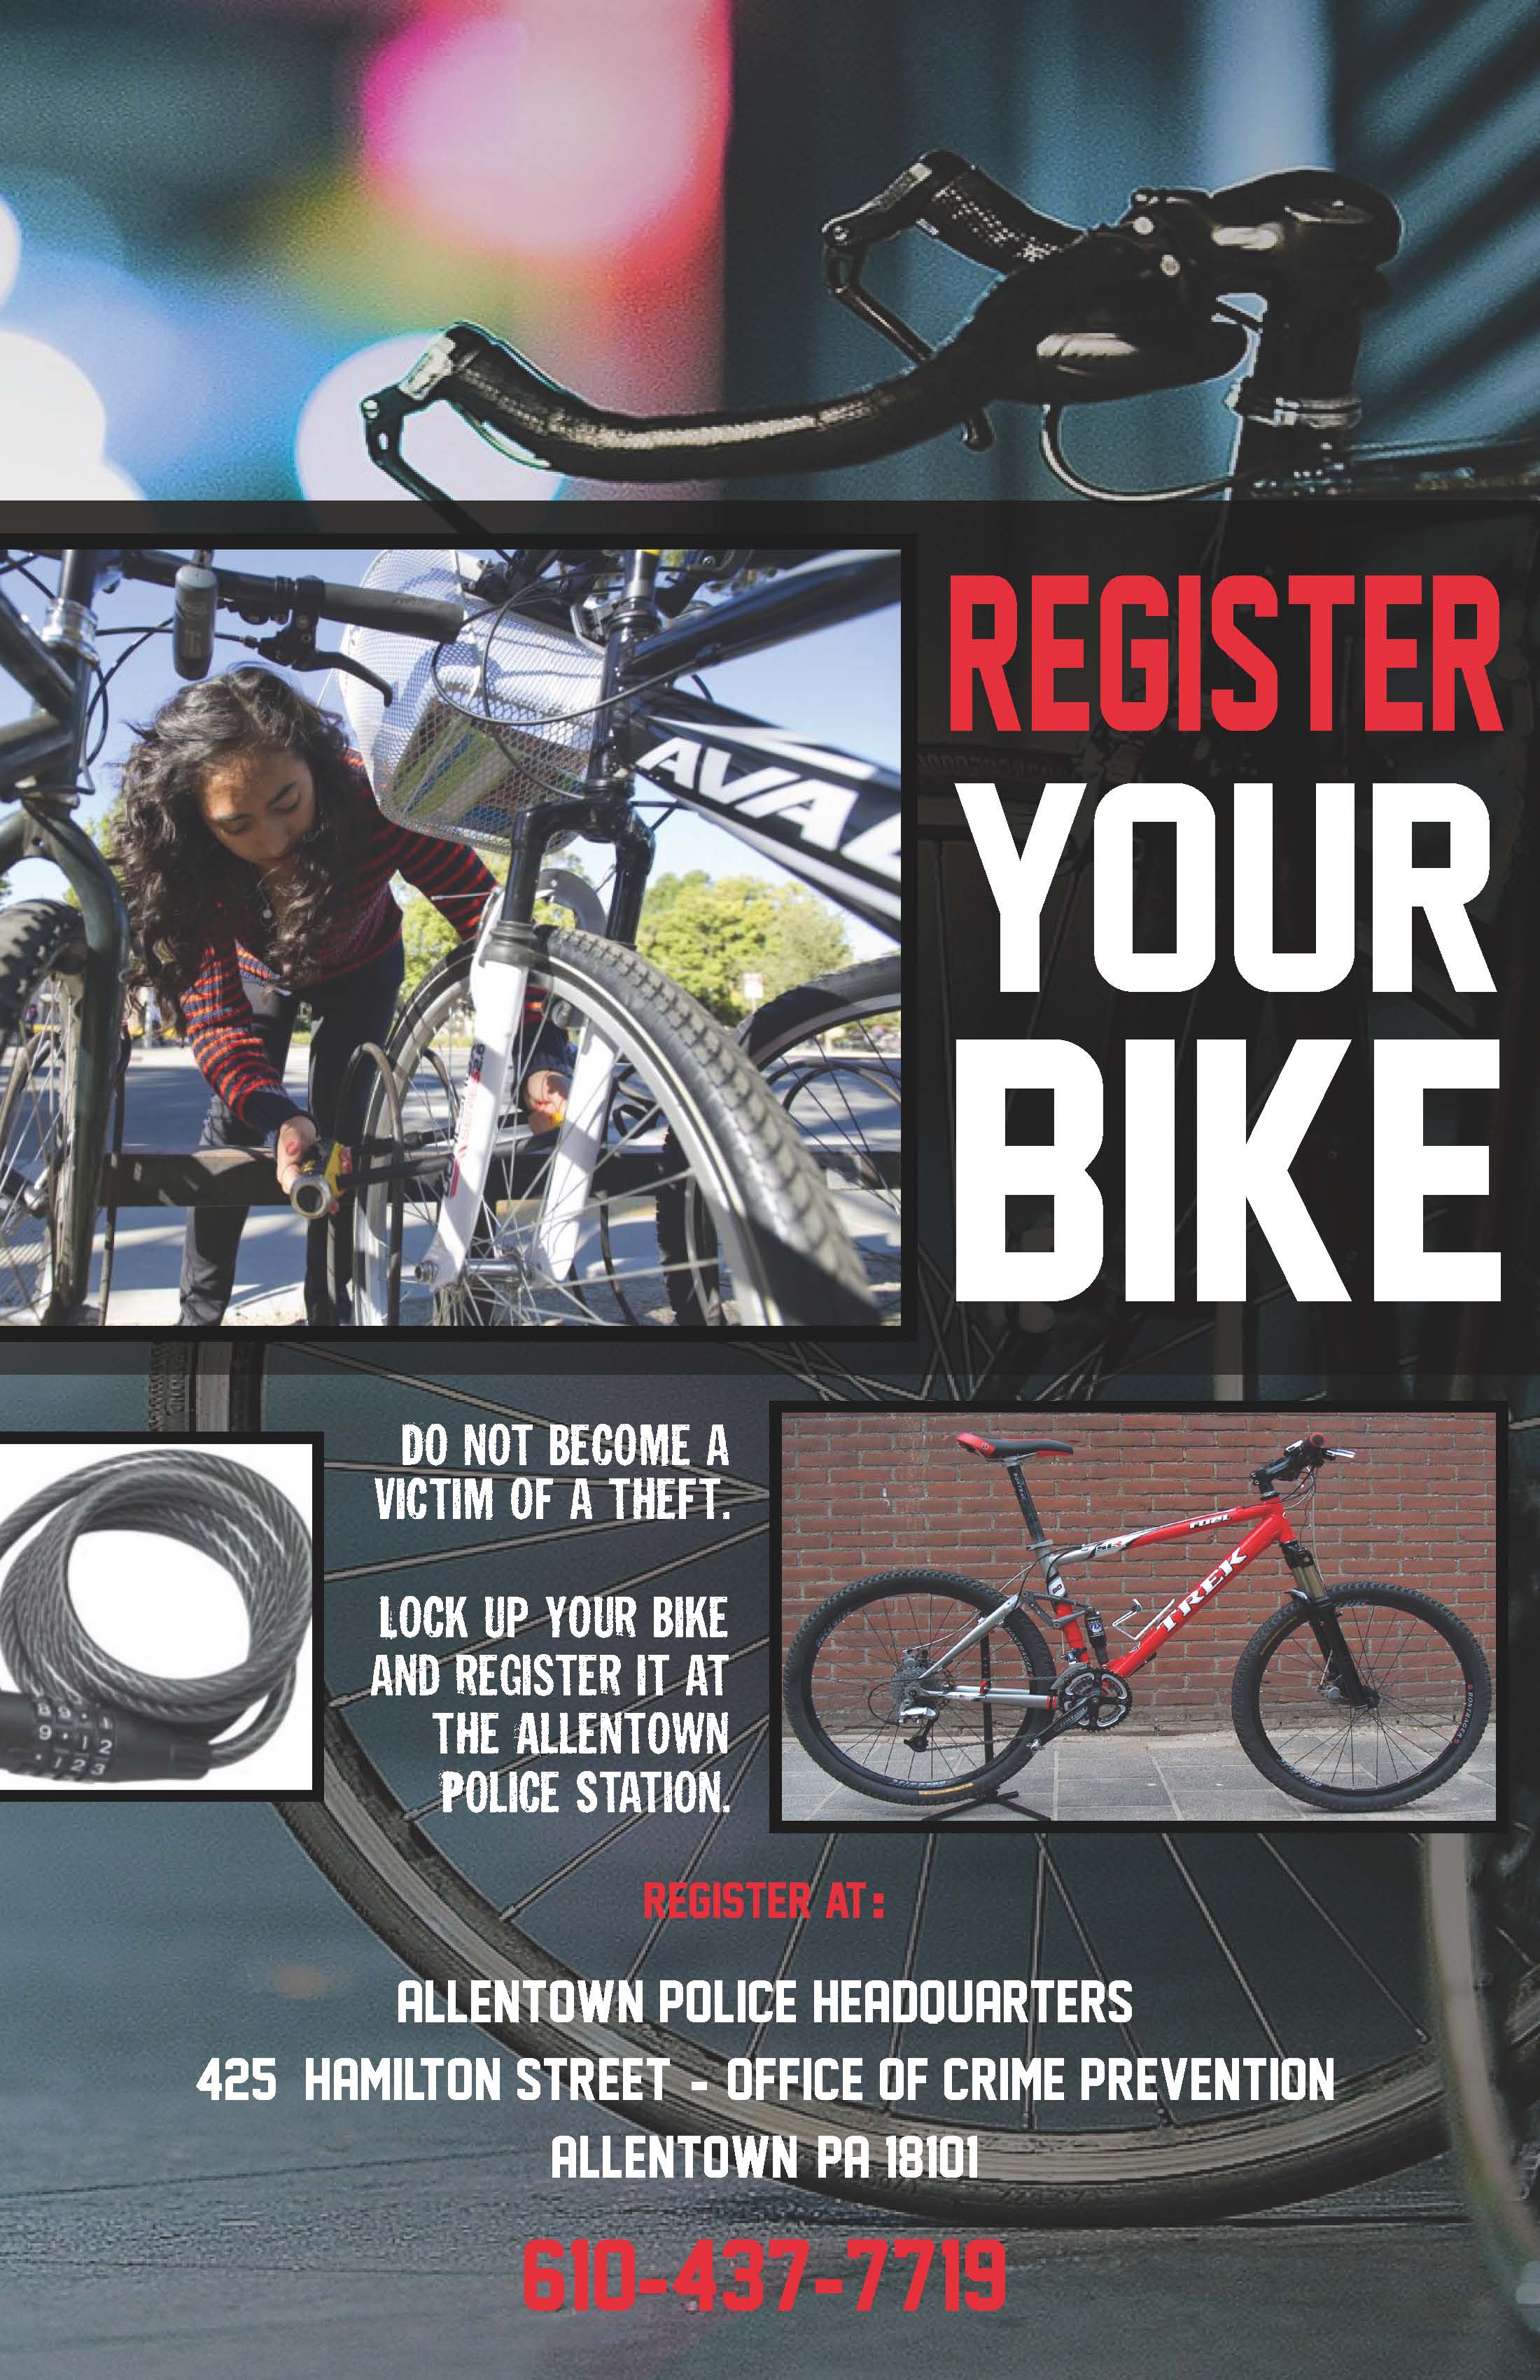 Click here to register your bike.